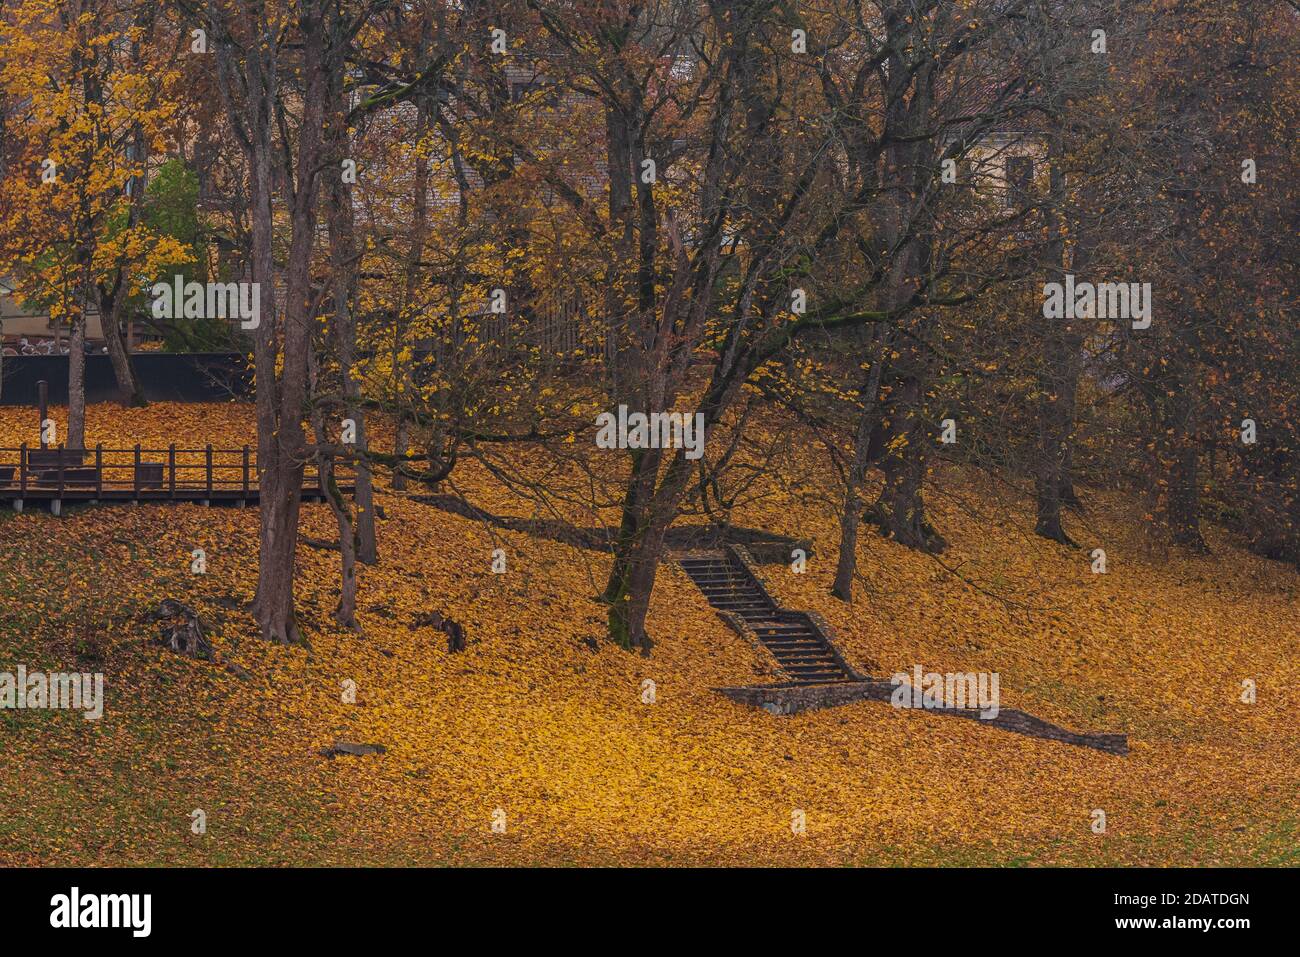 the stairs are surrounded by autumn yellow colors with yellow leaves that have fallen from adjacent trees Stock Photo